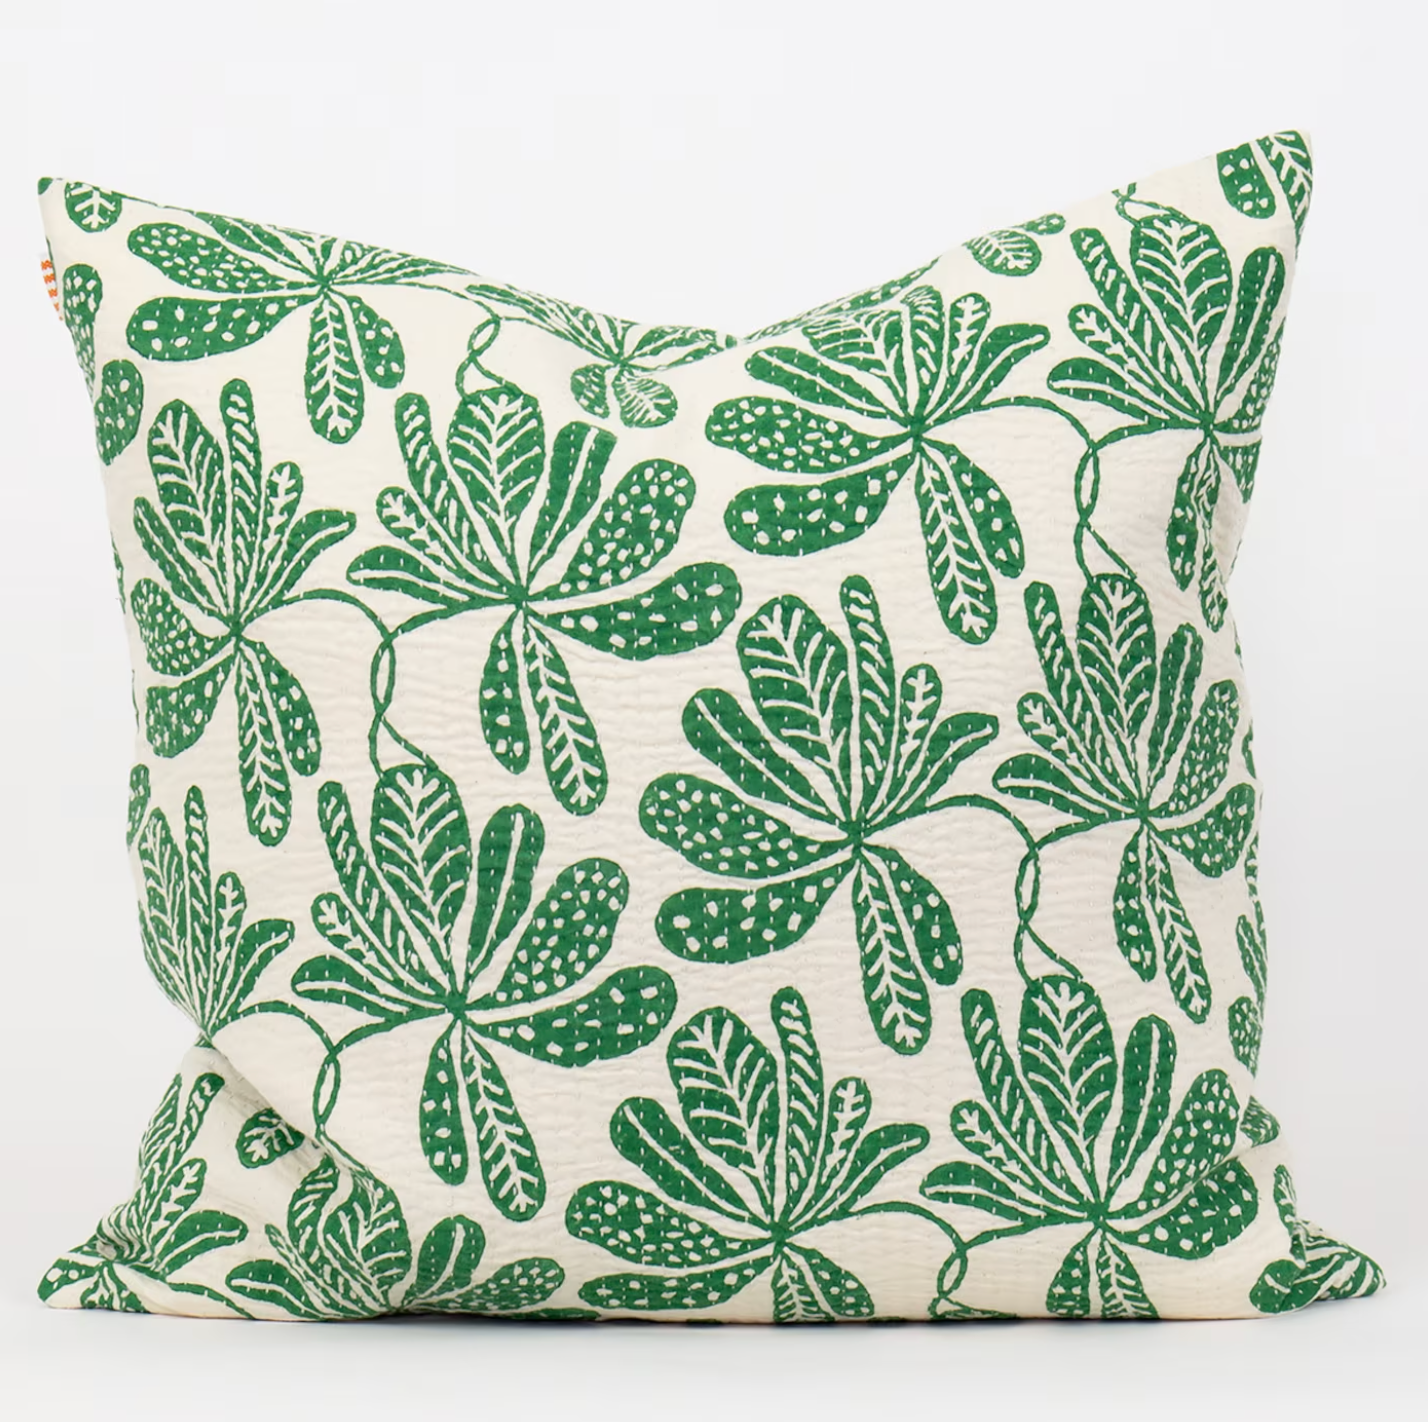 Cushion cover Chestnut Leaves 50x50, green, handprinted